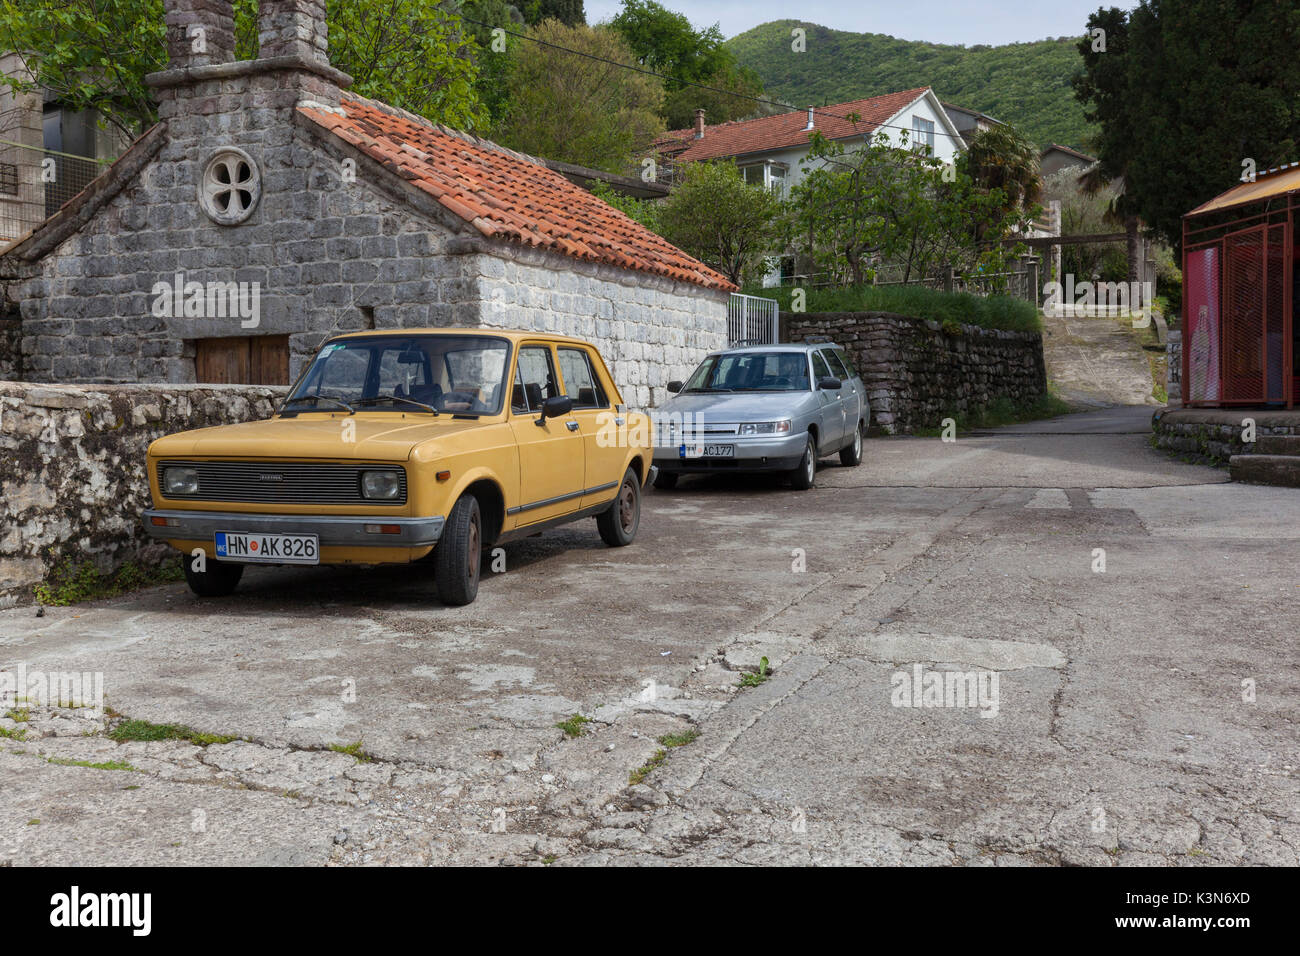 A vintage Zastava car parked in a street of Montenegro. Stock Photo